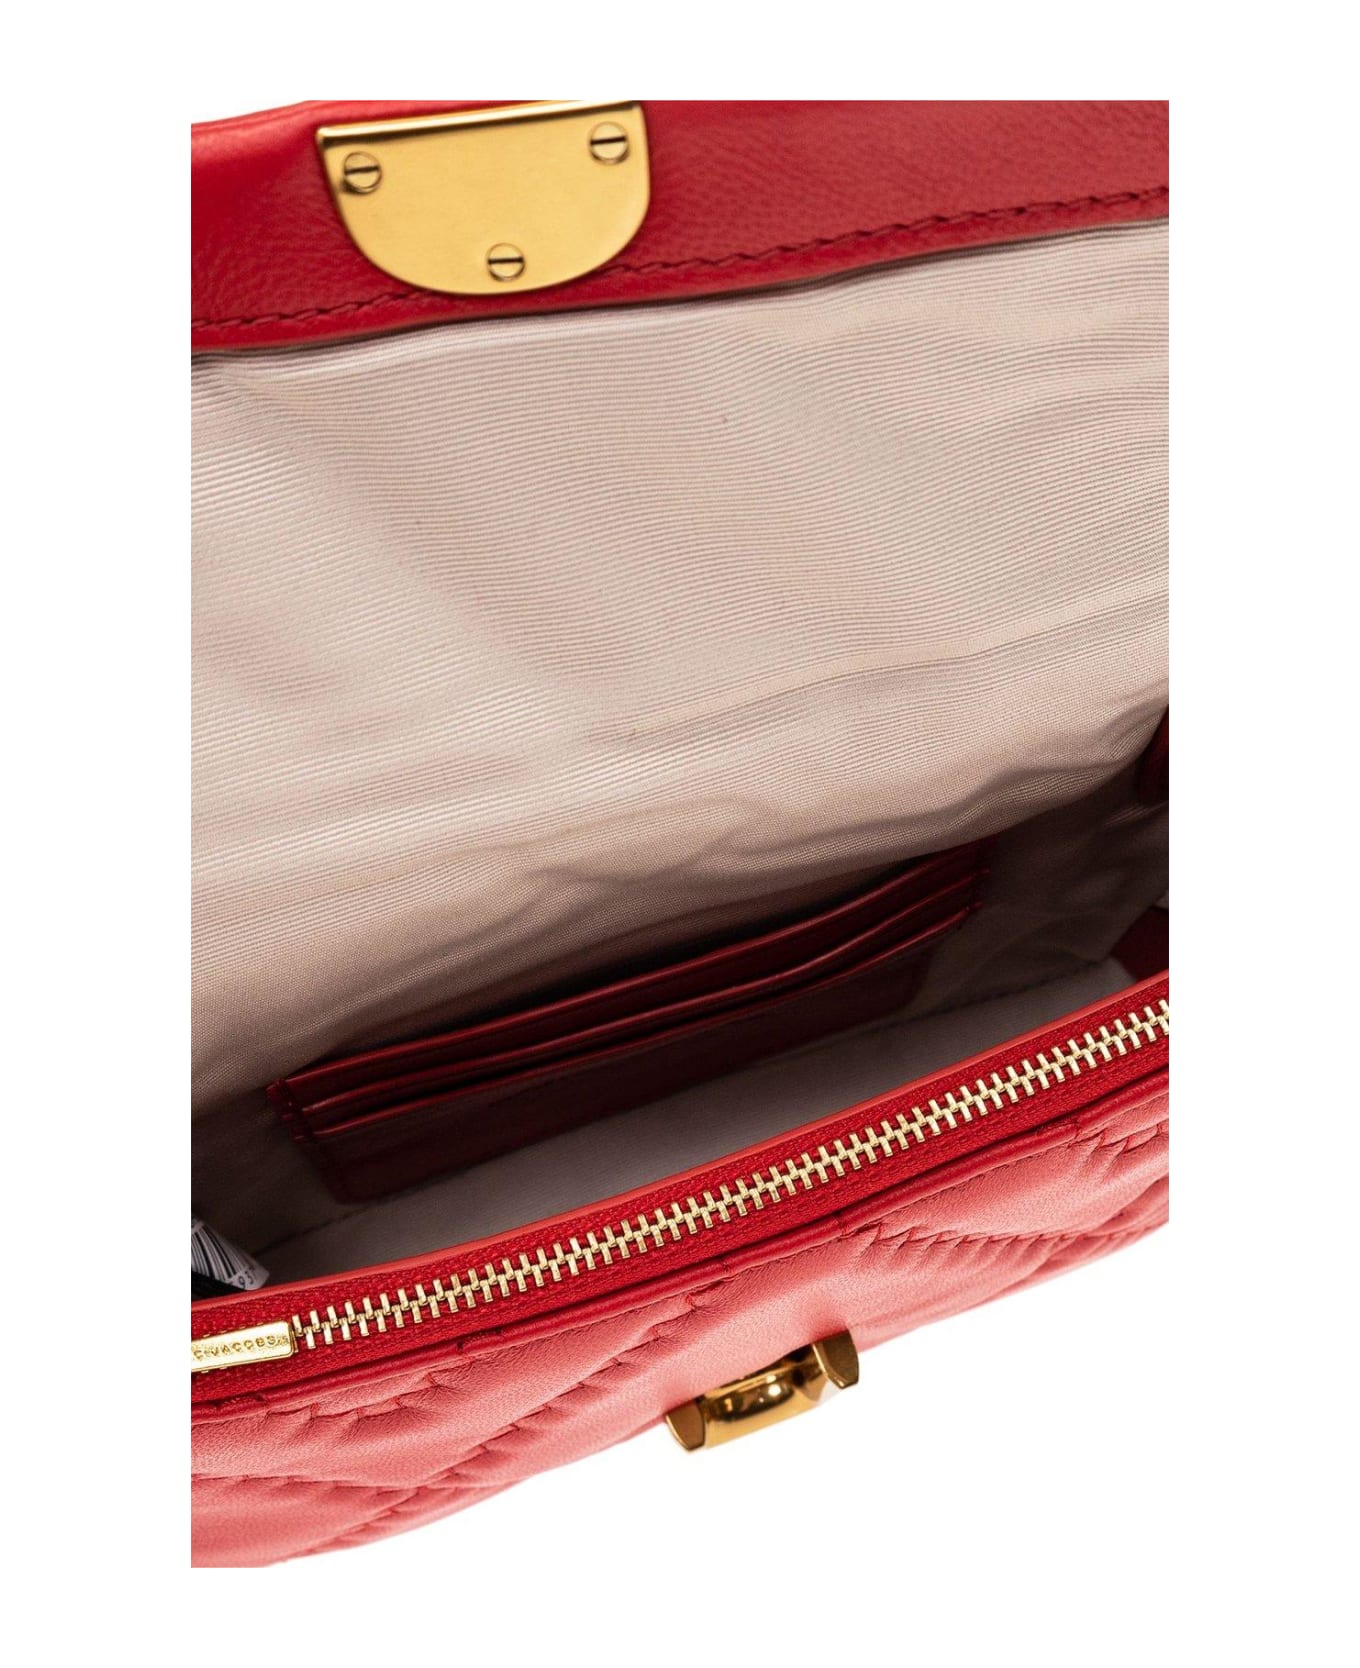 Marc Jacobs Logo Plaque Quilted Shoulder Bag - True Red ショルダーバッグ